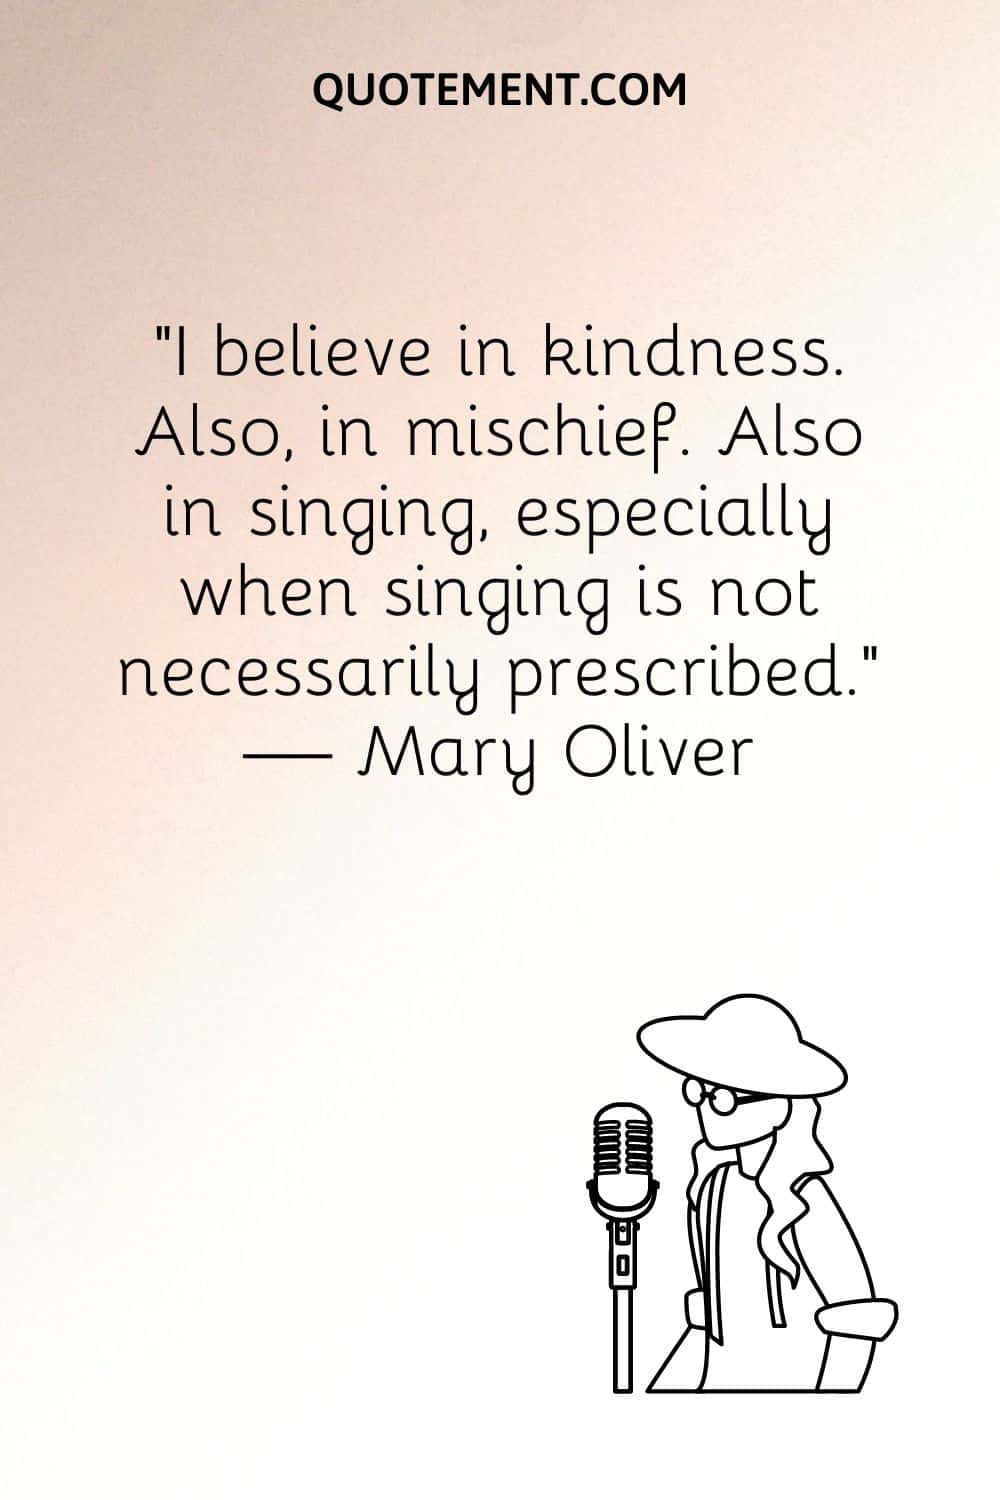 “I believe in kindness. Also, in mischief. Also in singing, especially when singing is not necessarily prescribed.” — Mary Oliver